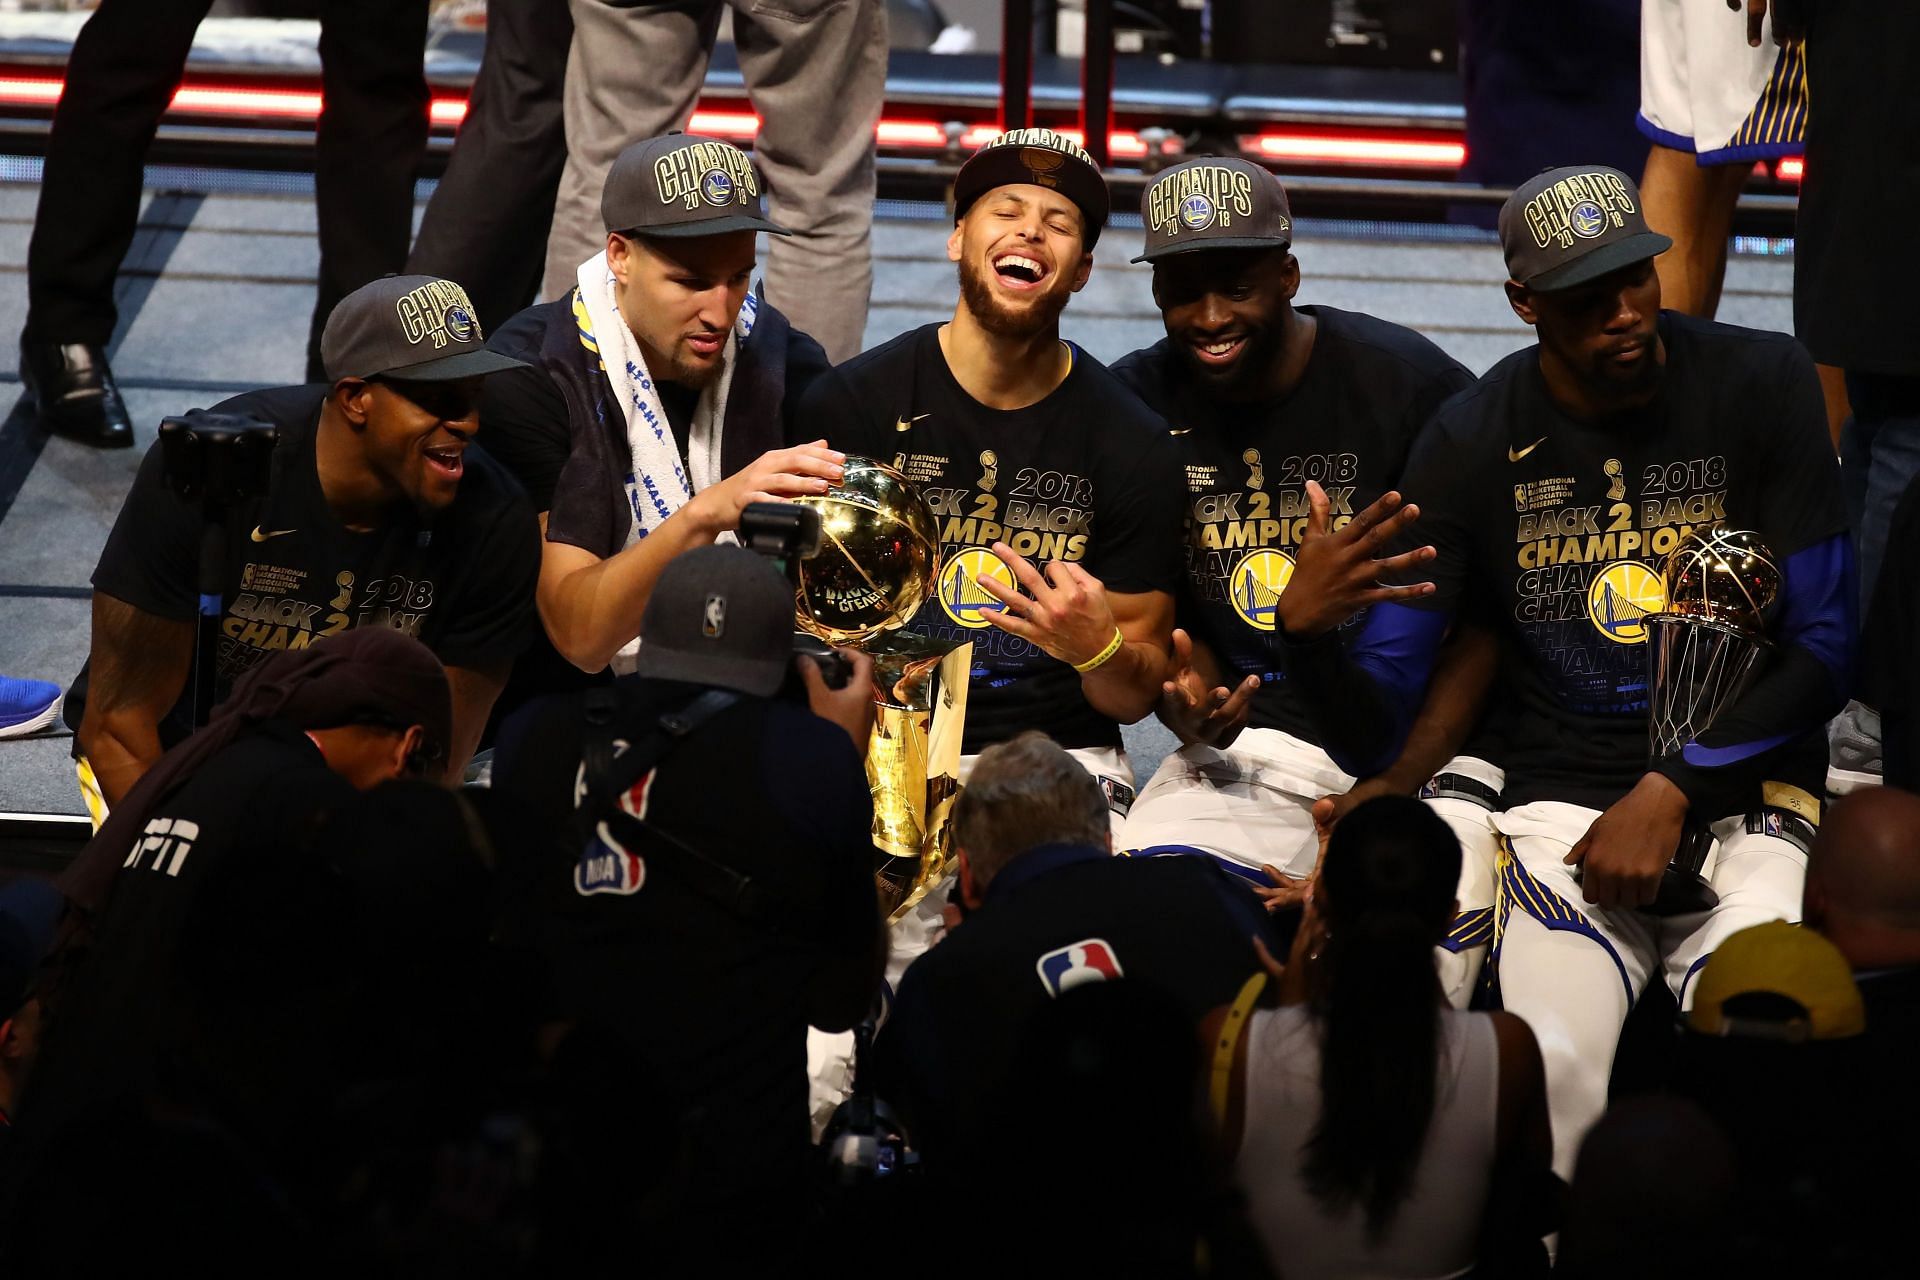 Andre Iguodala, Klay Thompson, Steph Curry, Draymond Green and Kevin Durant of the Golden State Warriors after winning the 2018 NBA Finals